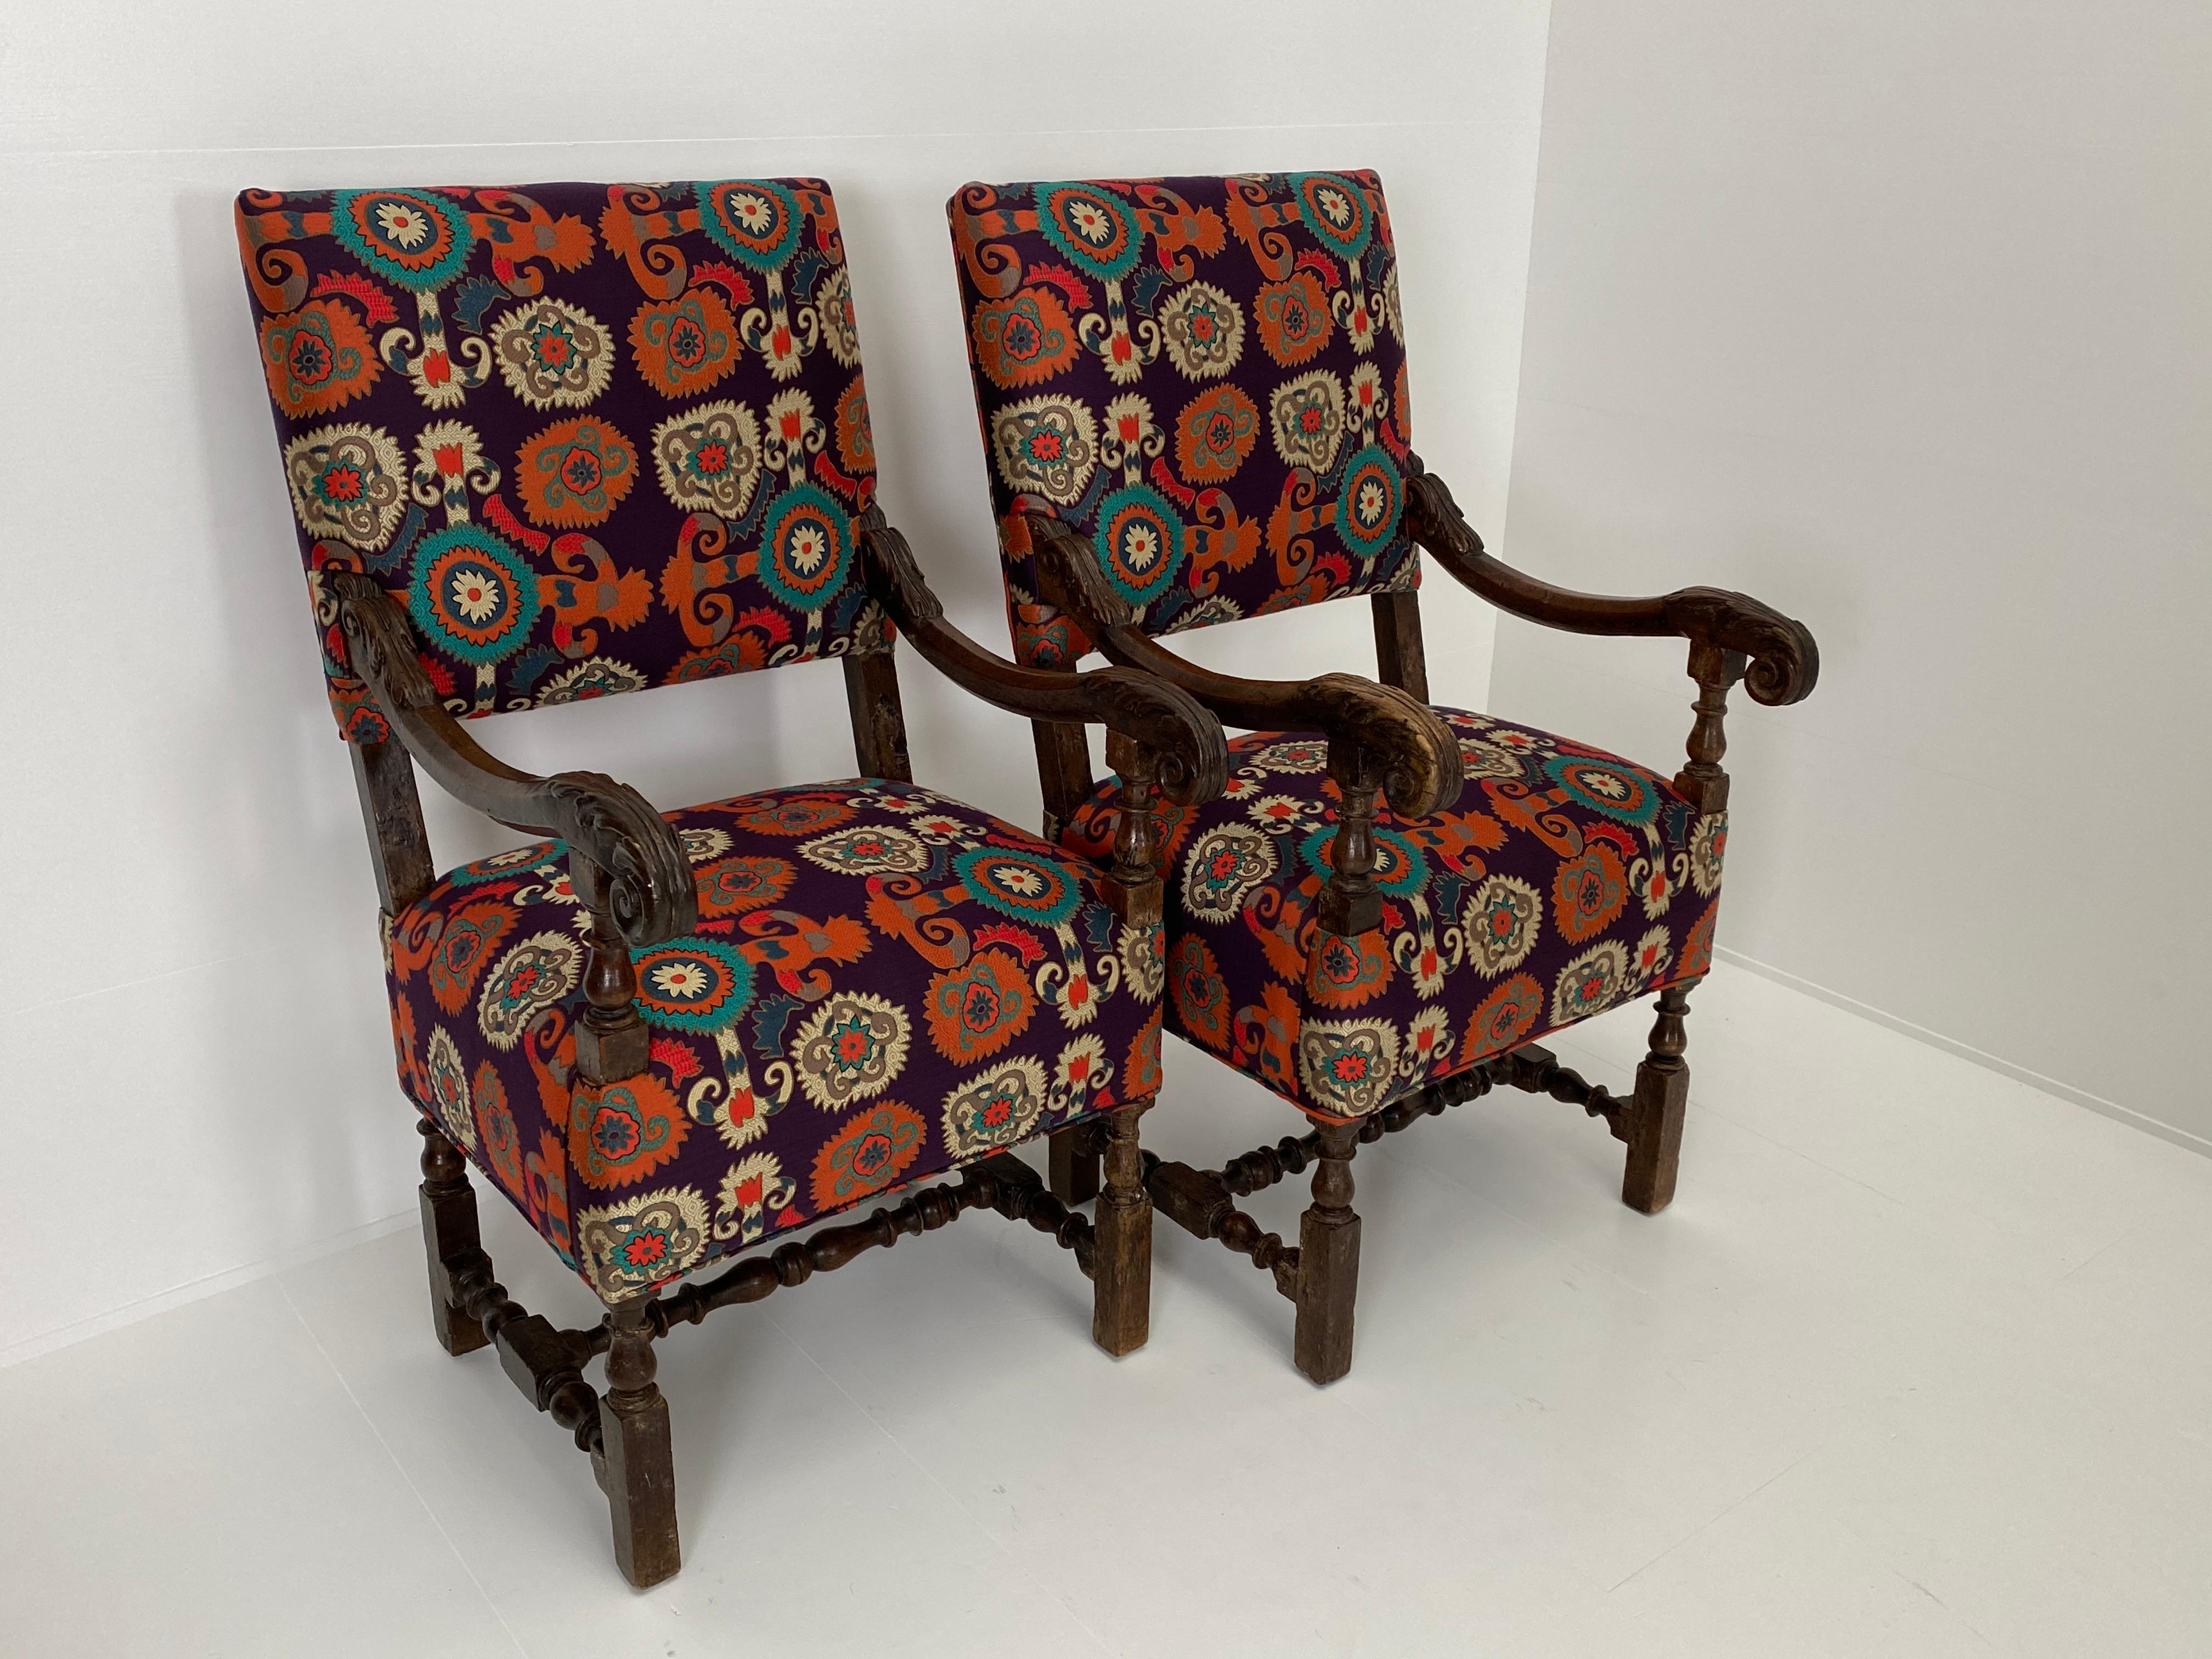 Pair of Italian Chairs, Etro Fabric In Good Condition For Sale In Schellebelle, BE